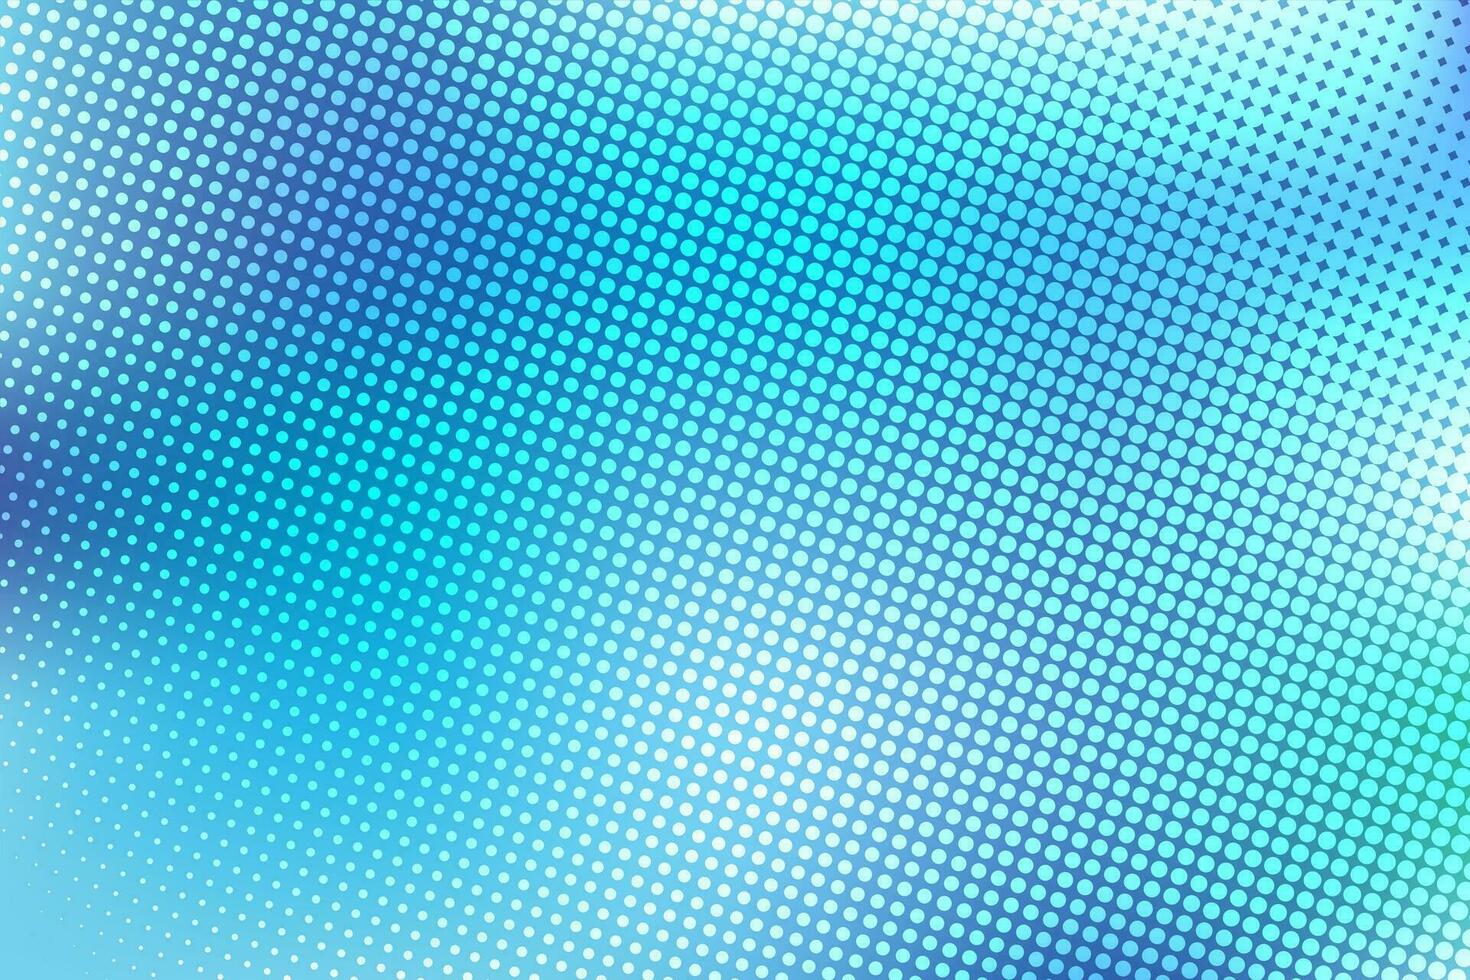 Hafttone pattern in blue tones. vector abstract gradient background